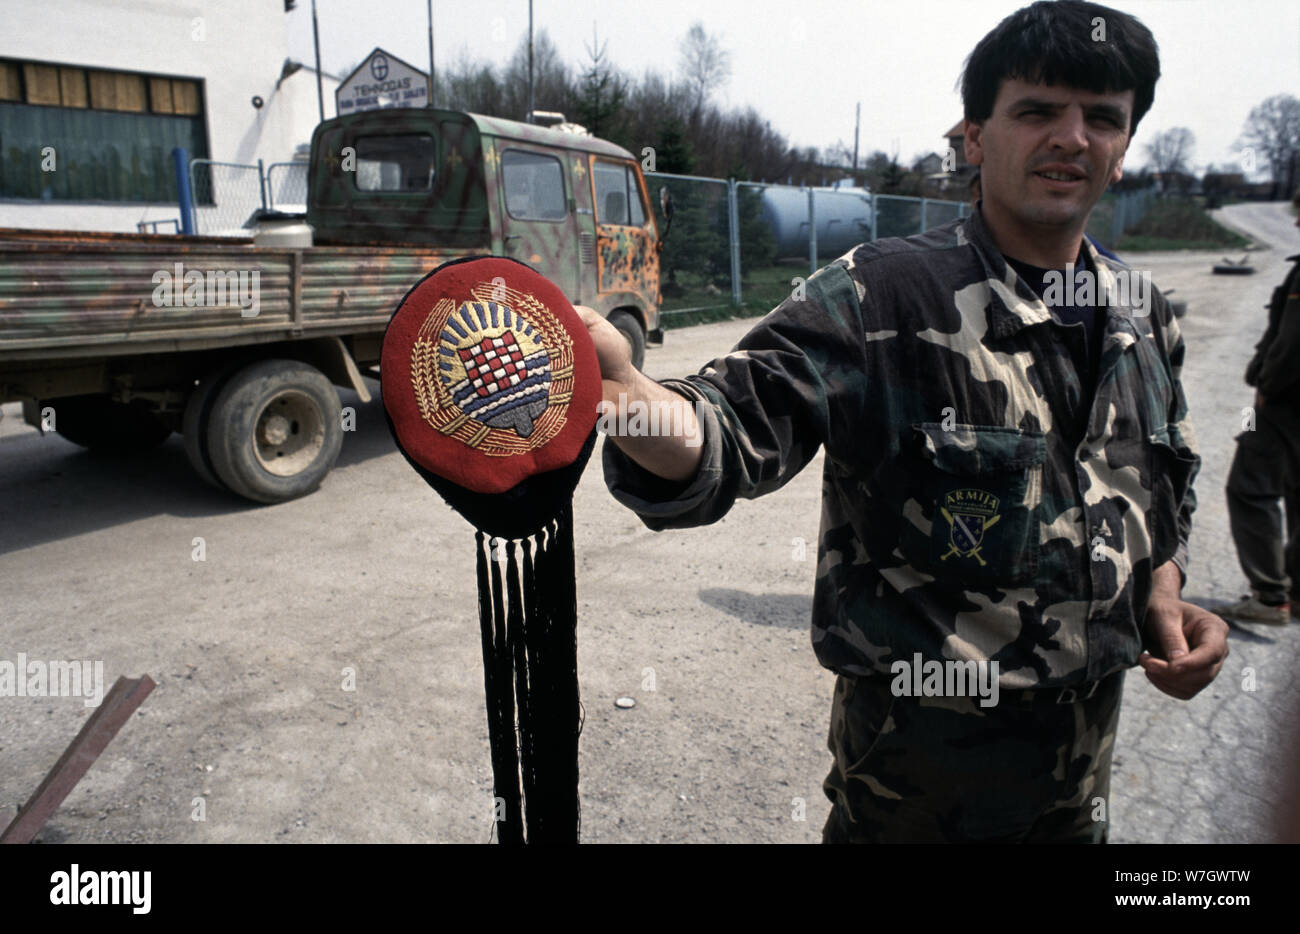 26th April 1993 During the war in central Bosnia: at a military checkpoint on the road between Busovaca and Medovici, an ARBiH (Bosnian Muslim) soldier displays a Lika cap, a hat typically worn by Croats as part of their traditional costume. The Croatian flag is embroidered on the hat. Stock Photo